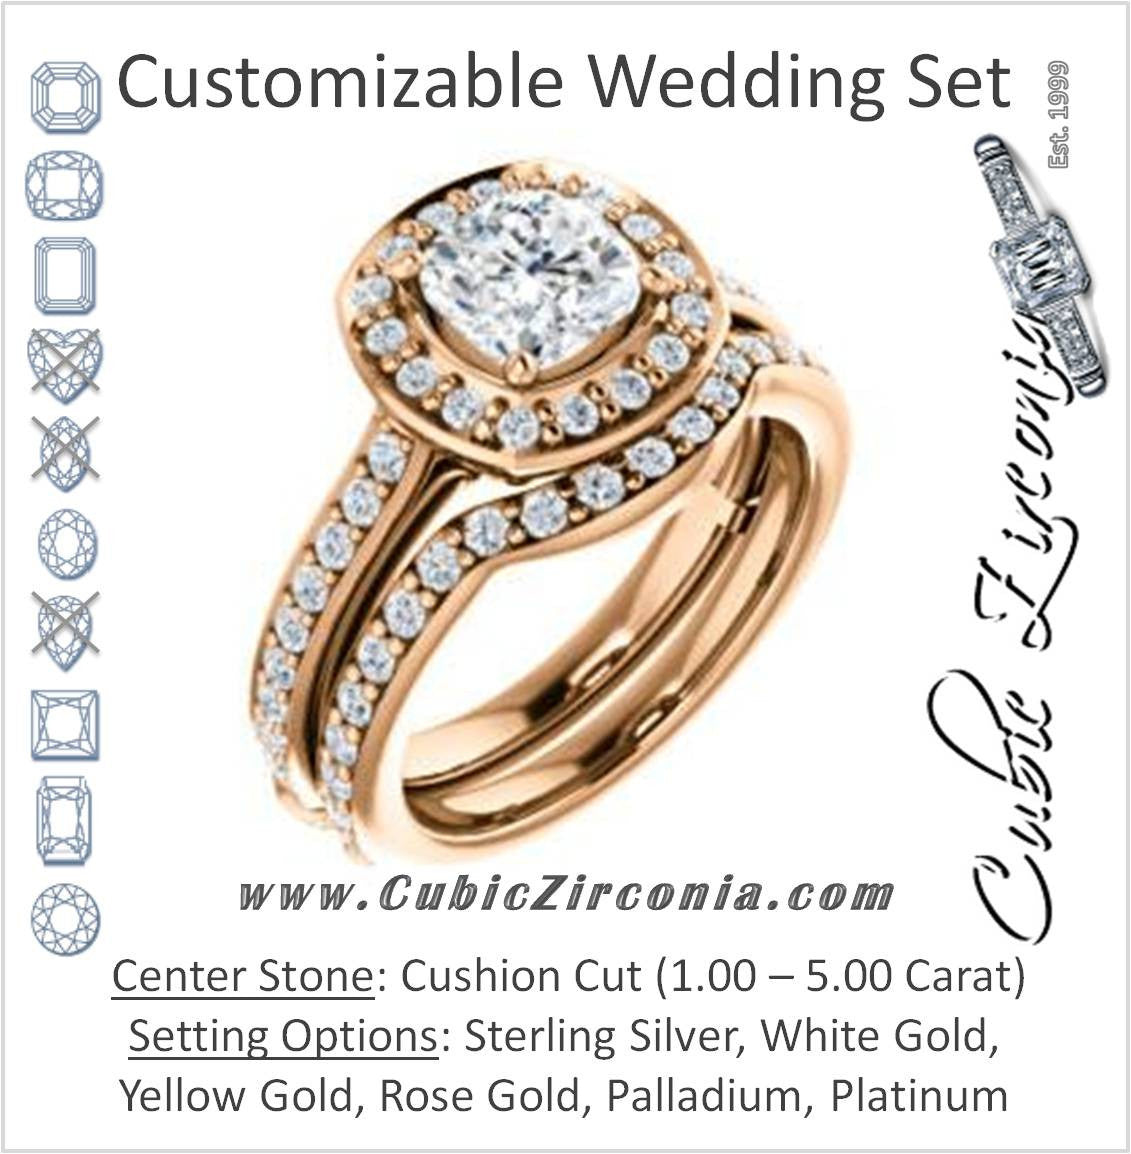 CZ Wedding Set, featuring The Sally engagement ring (Customizable Halo-Cushion Cut Design with Round Side Knuckle and Pavé Band Accents)